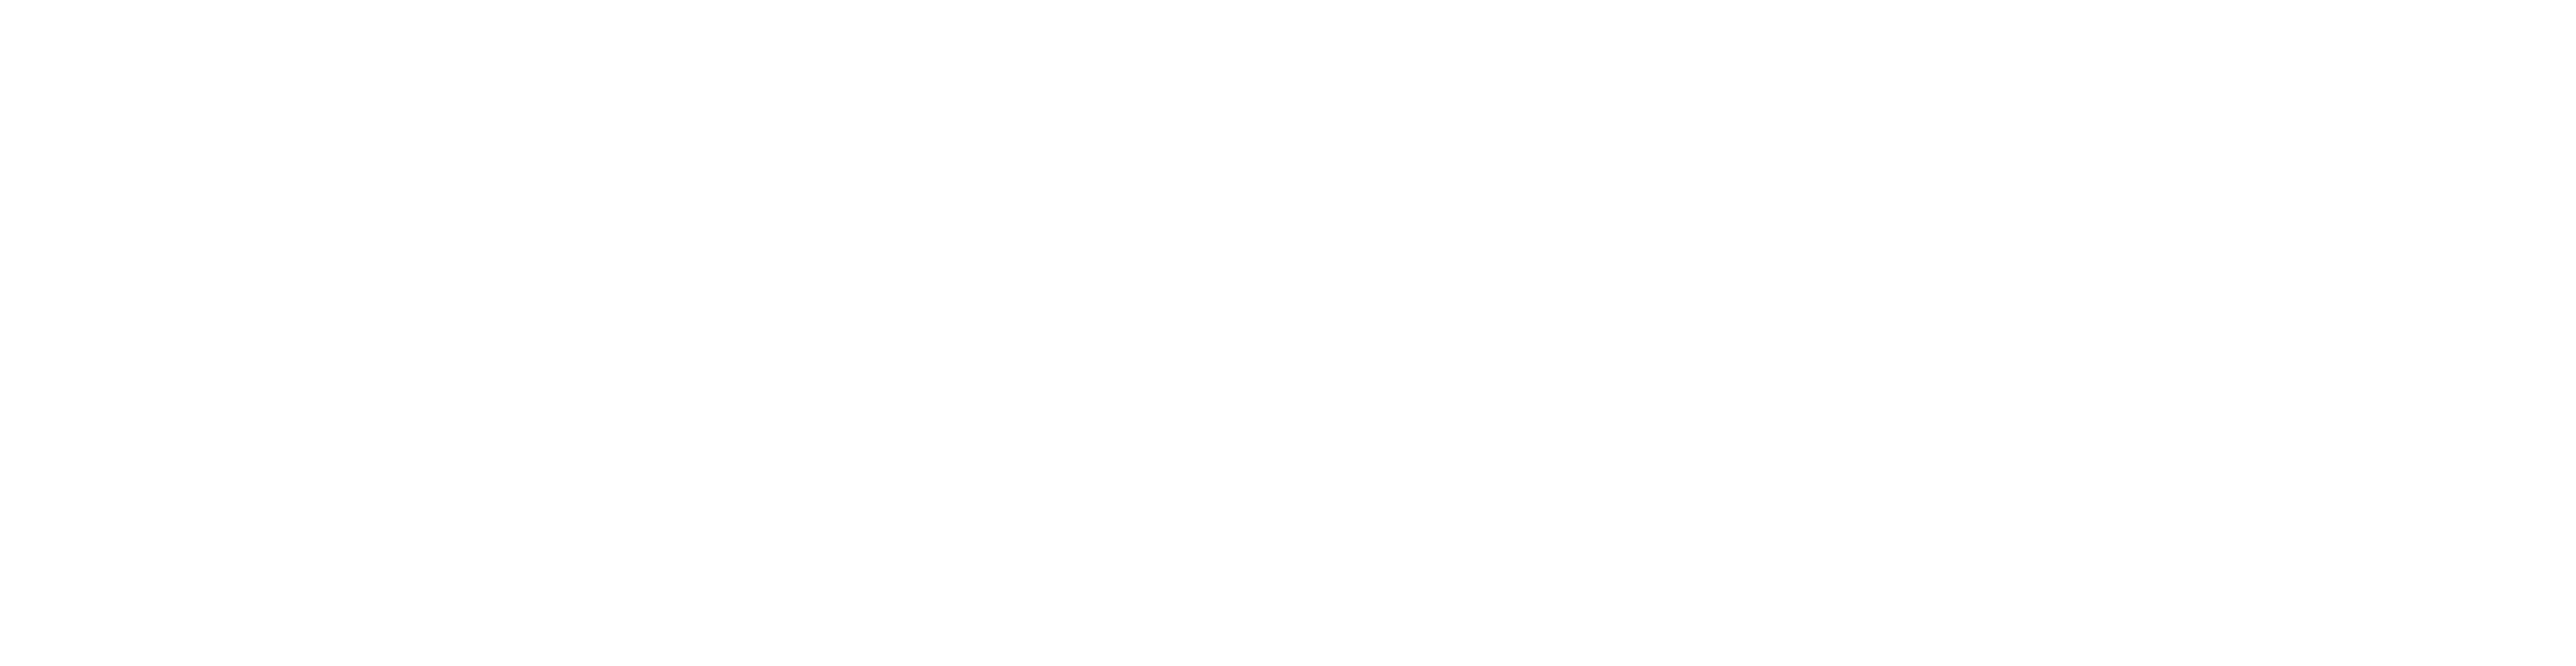 About the Office - BC's Office of the Human Rights Commissioner